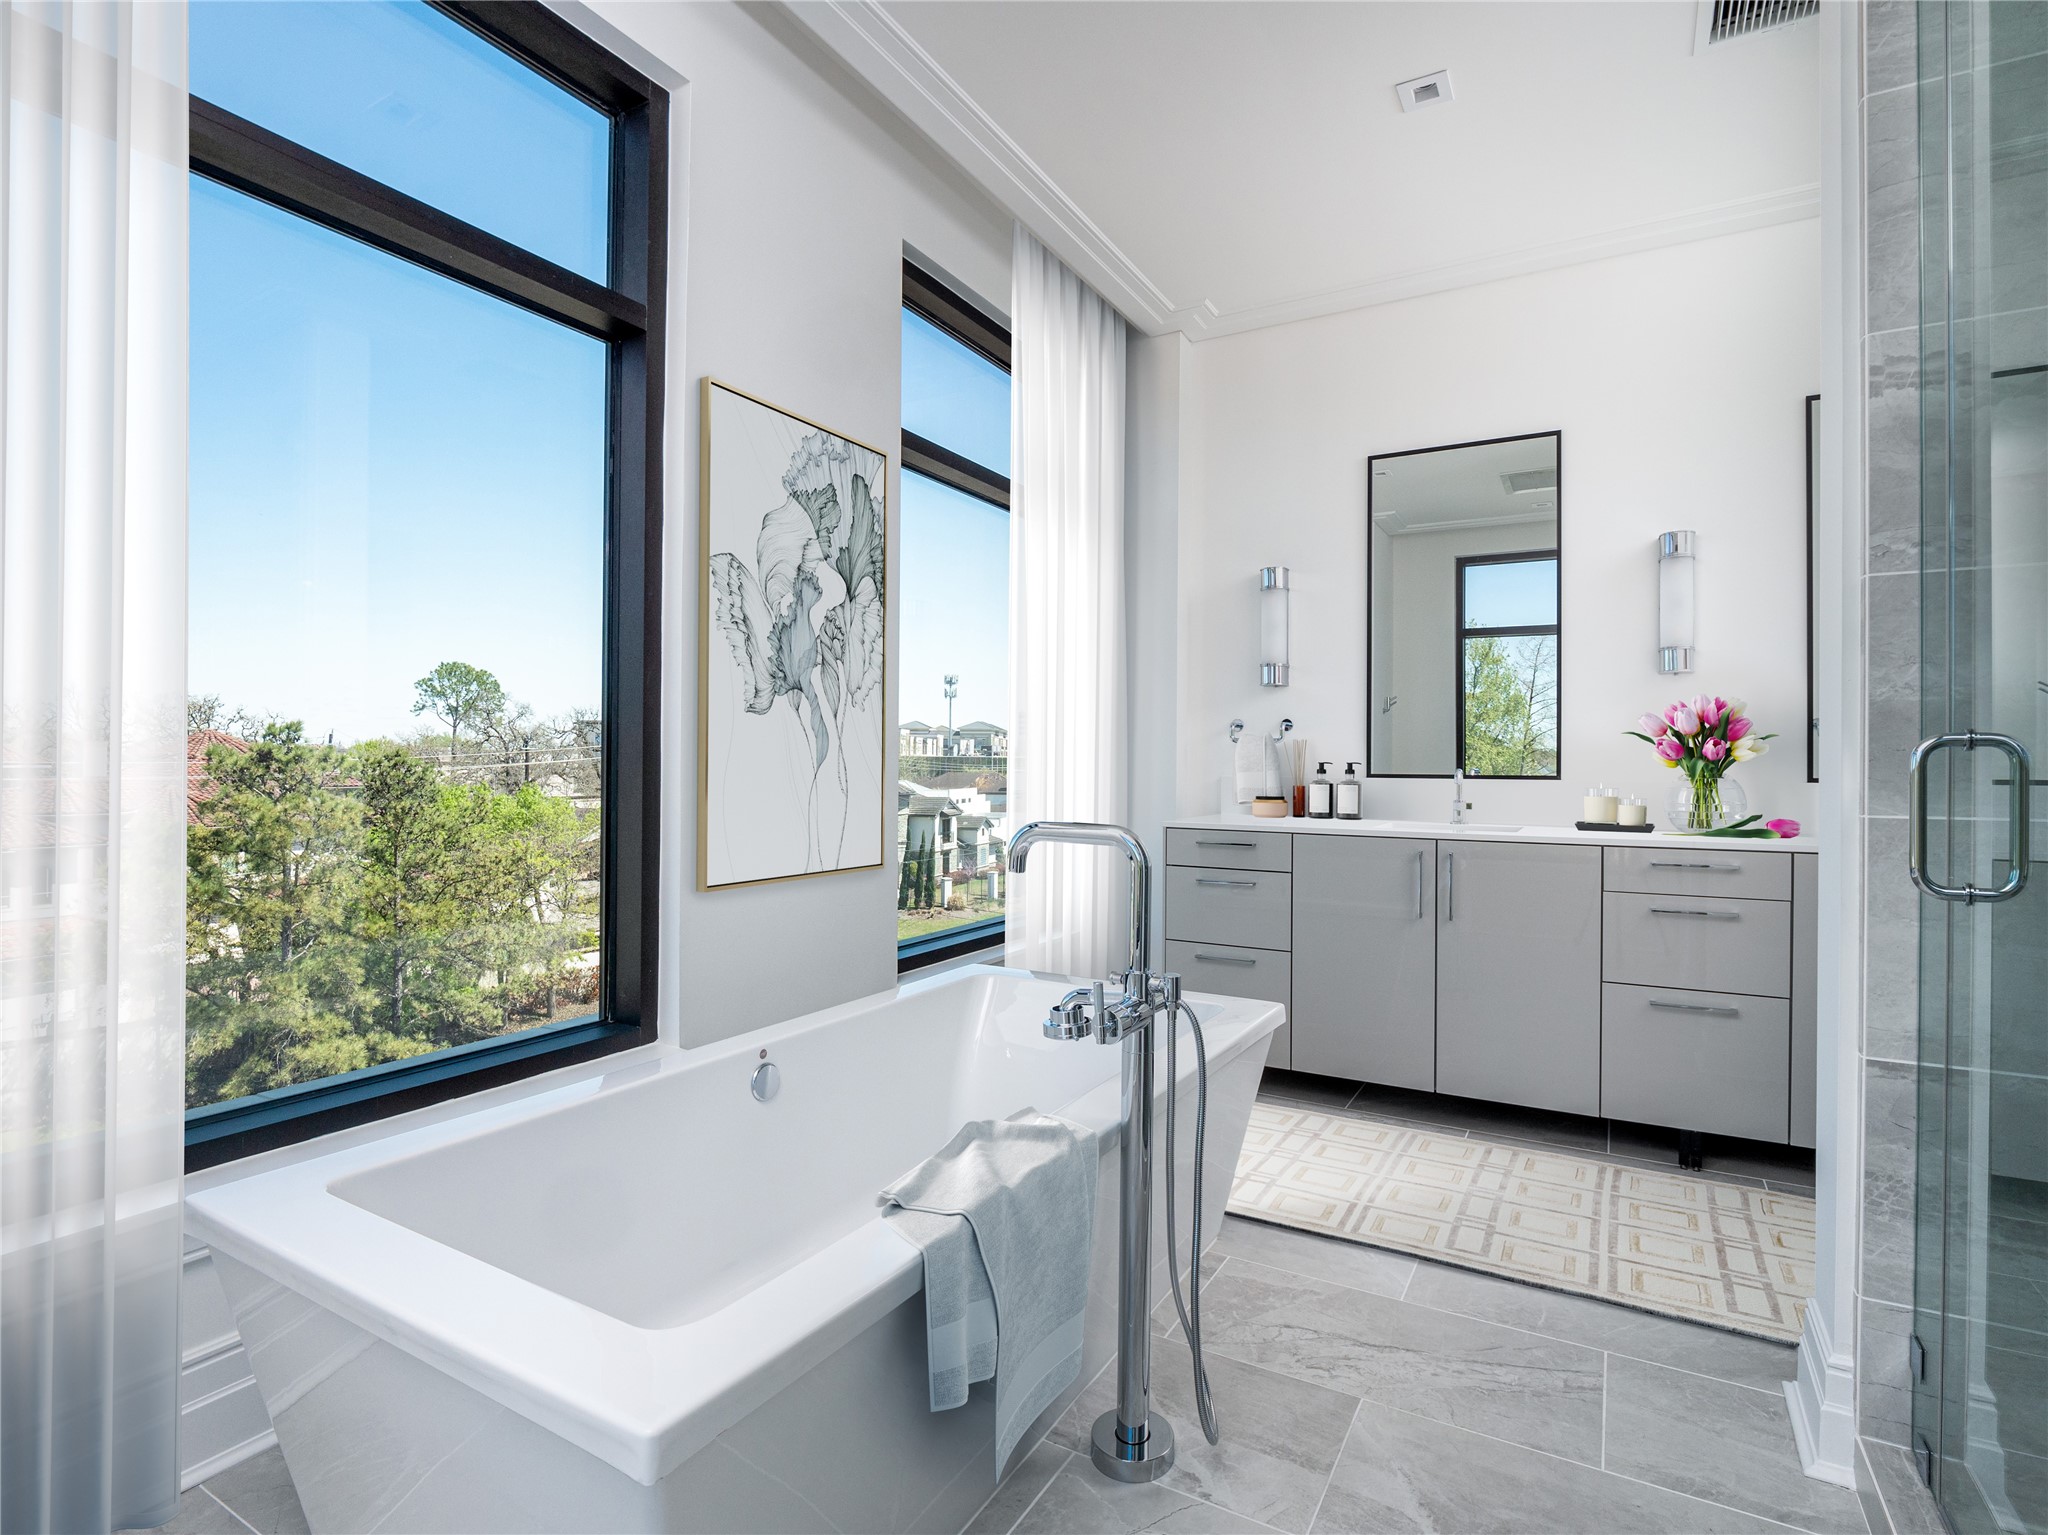 At the end of the day, come home to this sleek and relaxing free-standing designer soaking tub with incredible views.